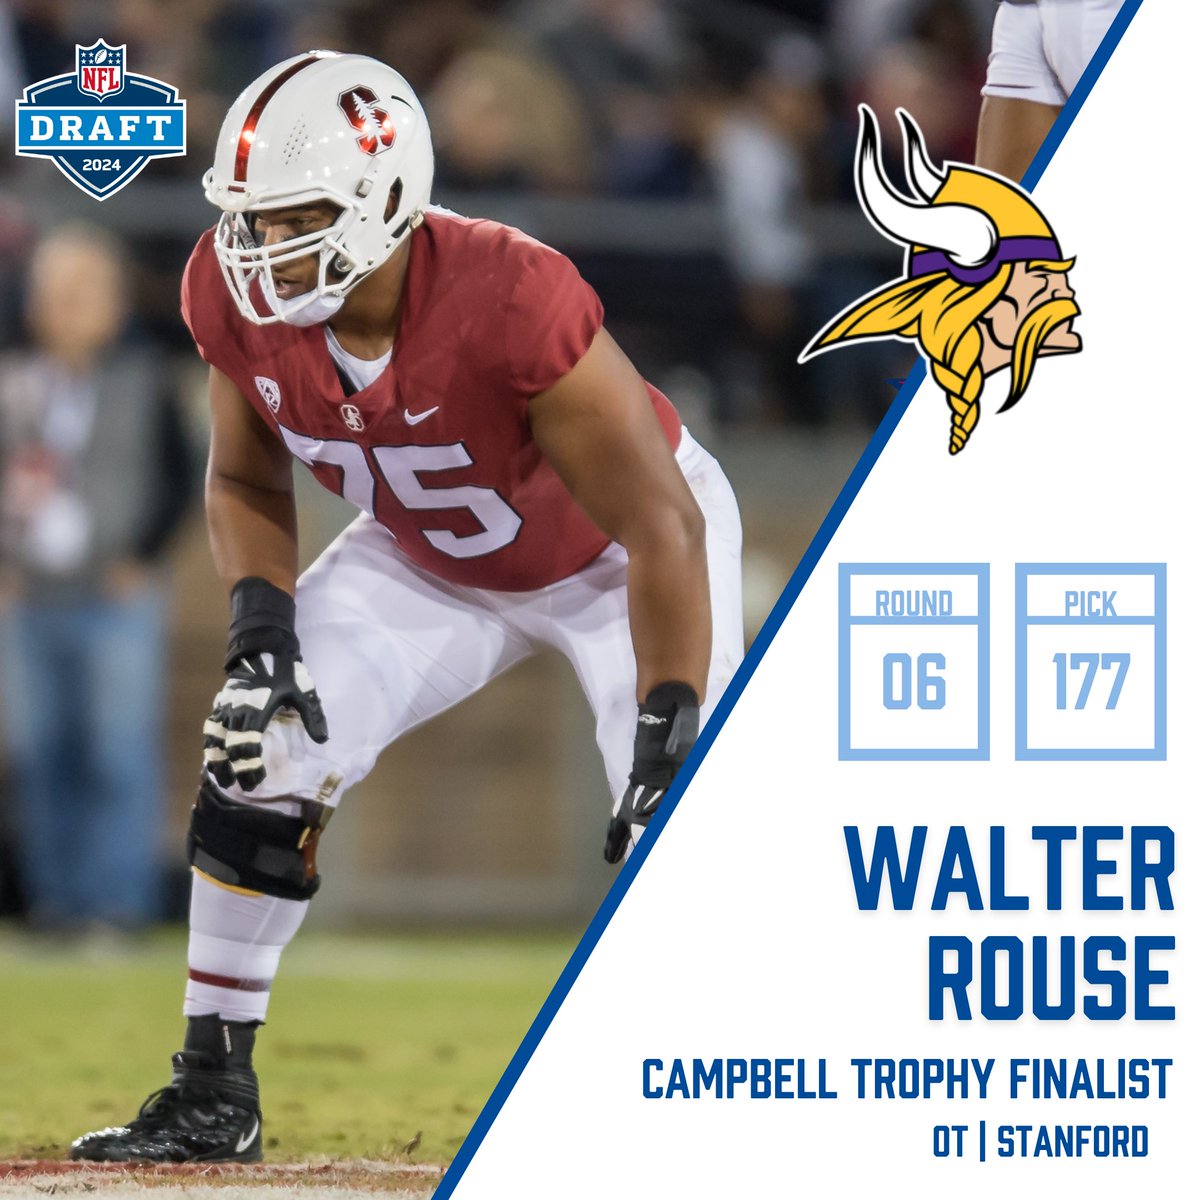 Cardinal >> Sooner >> SKOL VIKINGS! Congrats to 2022 #CampbellTrophy finalist Walter Rouse who is headed to Minnesota!